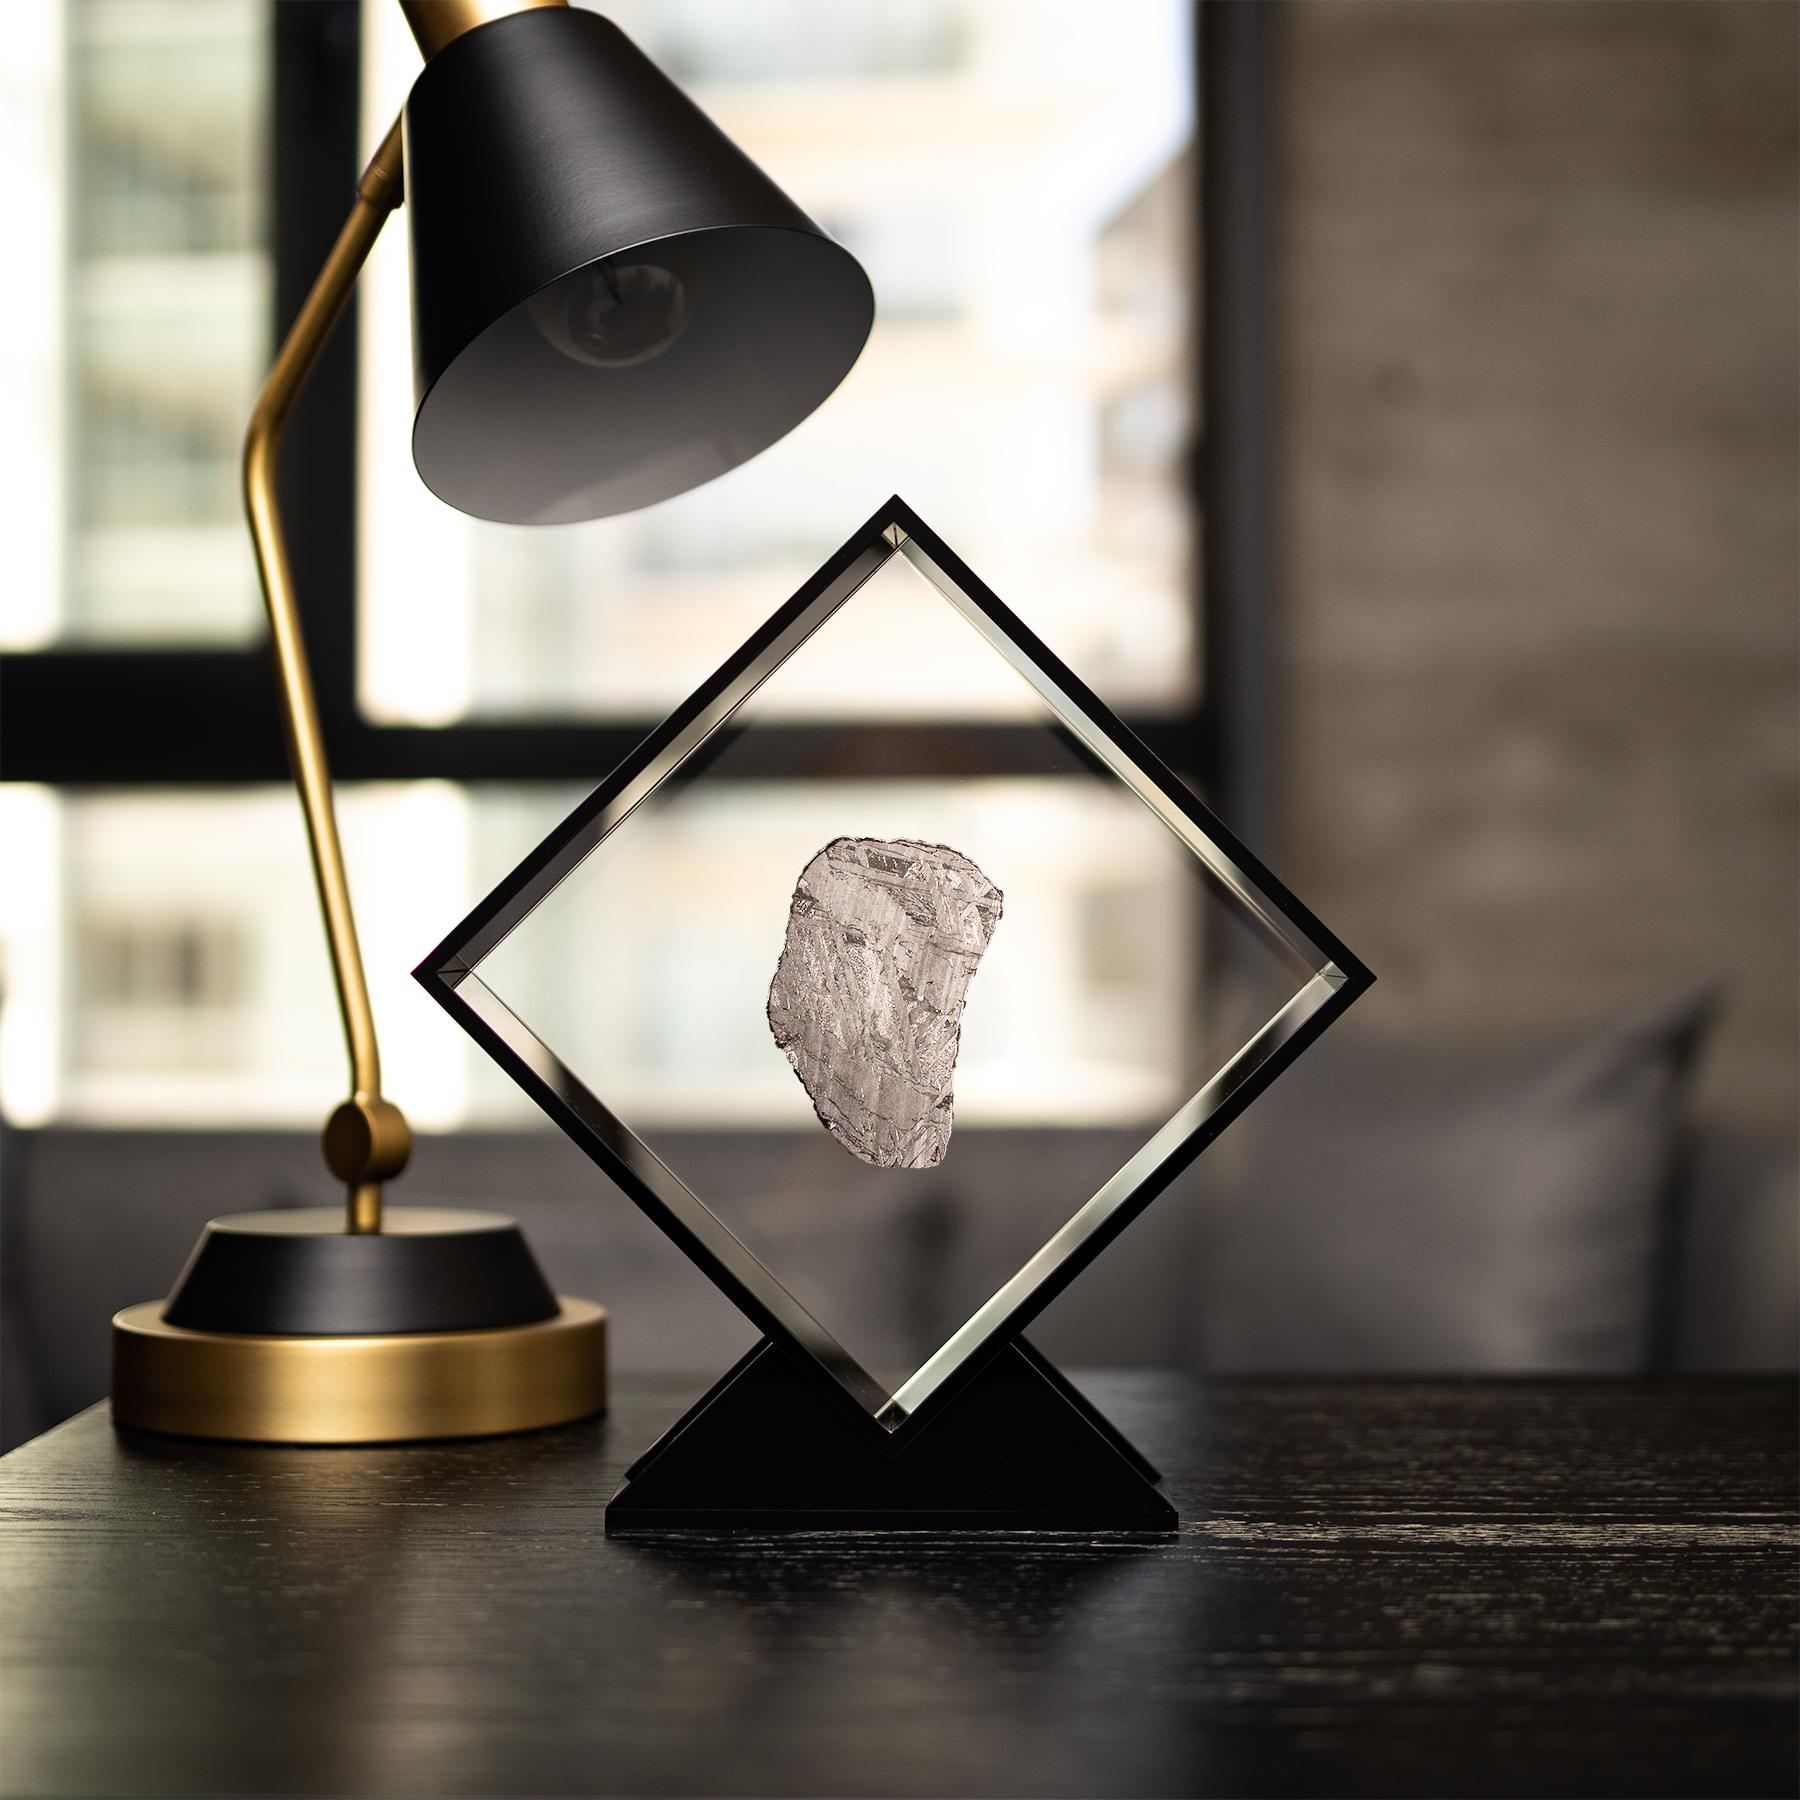 Original design in Acrylic display with a magnet making the meteorite look as it´s floating the same way it did in outer space for years before its final visit to Earth. 
Seymchan Meteorite 
Origin: Magadan Oblast, Russia
Classification: